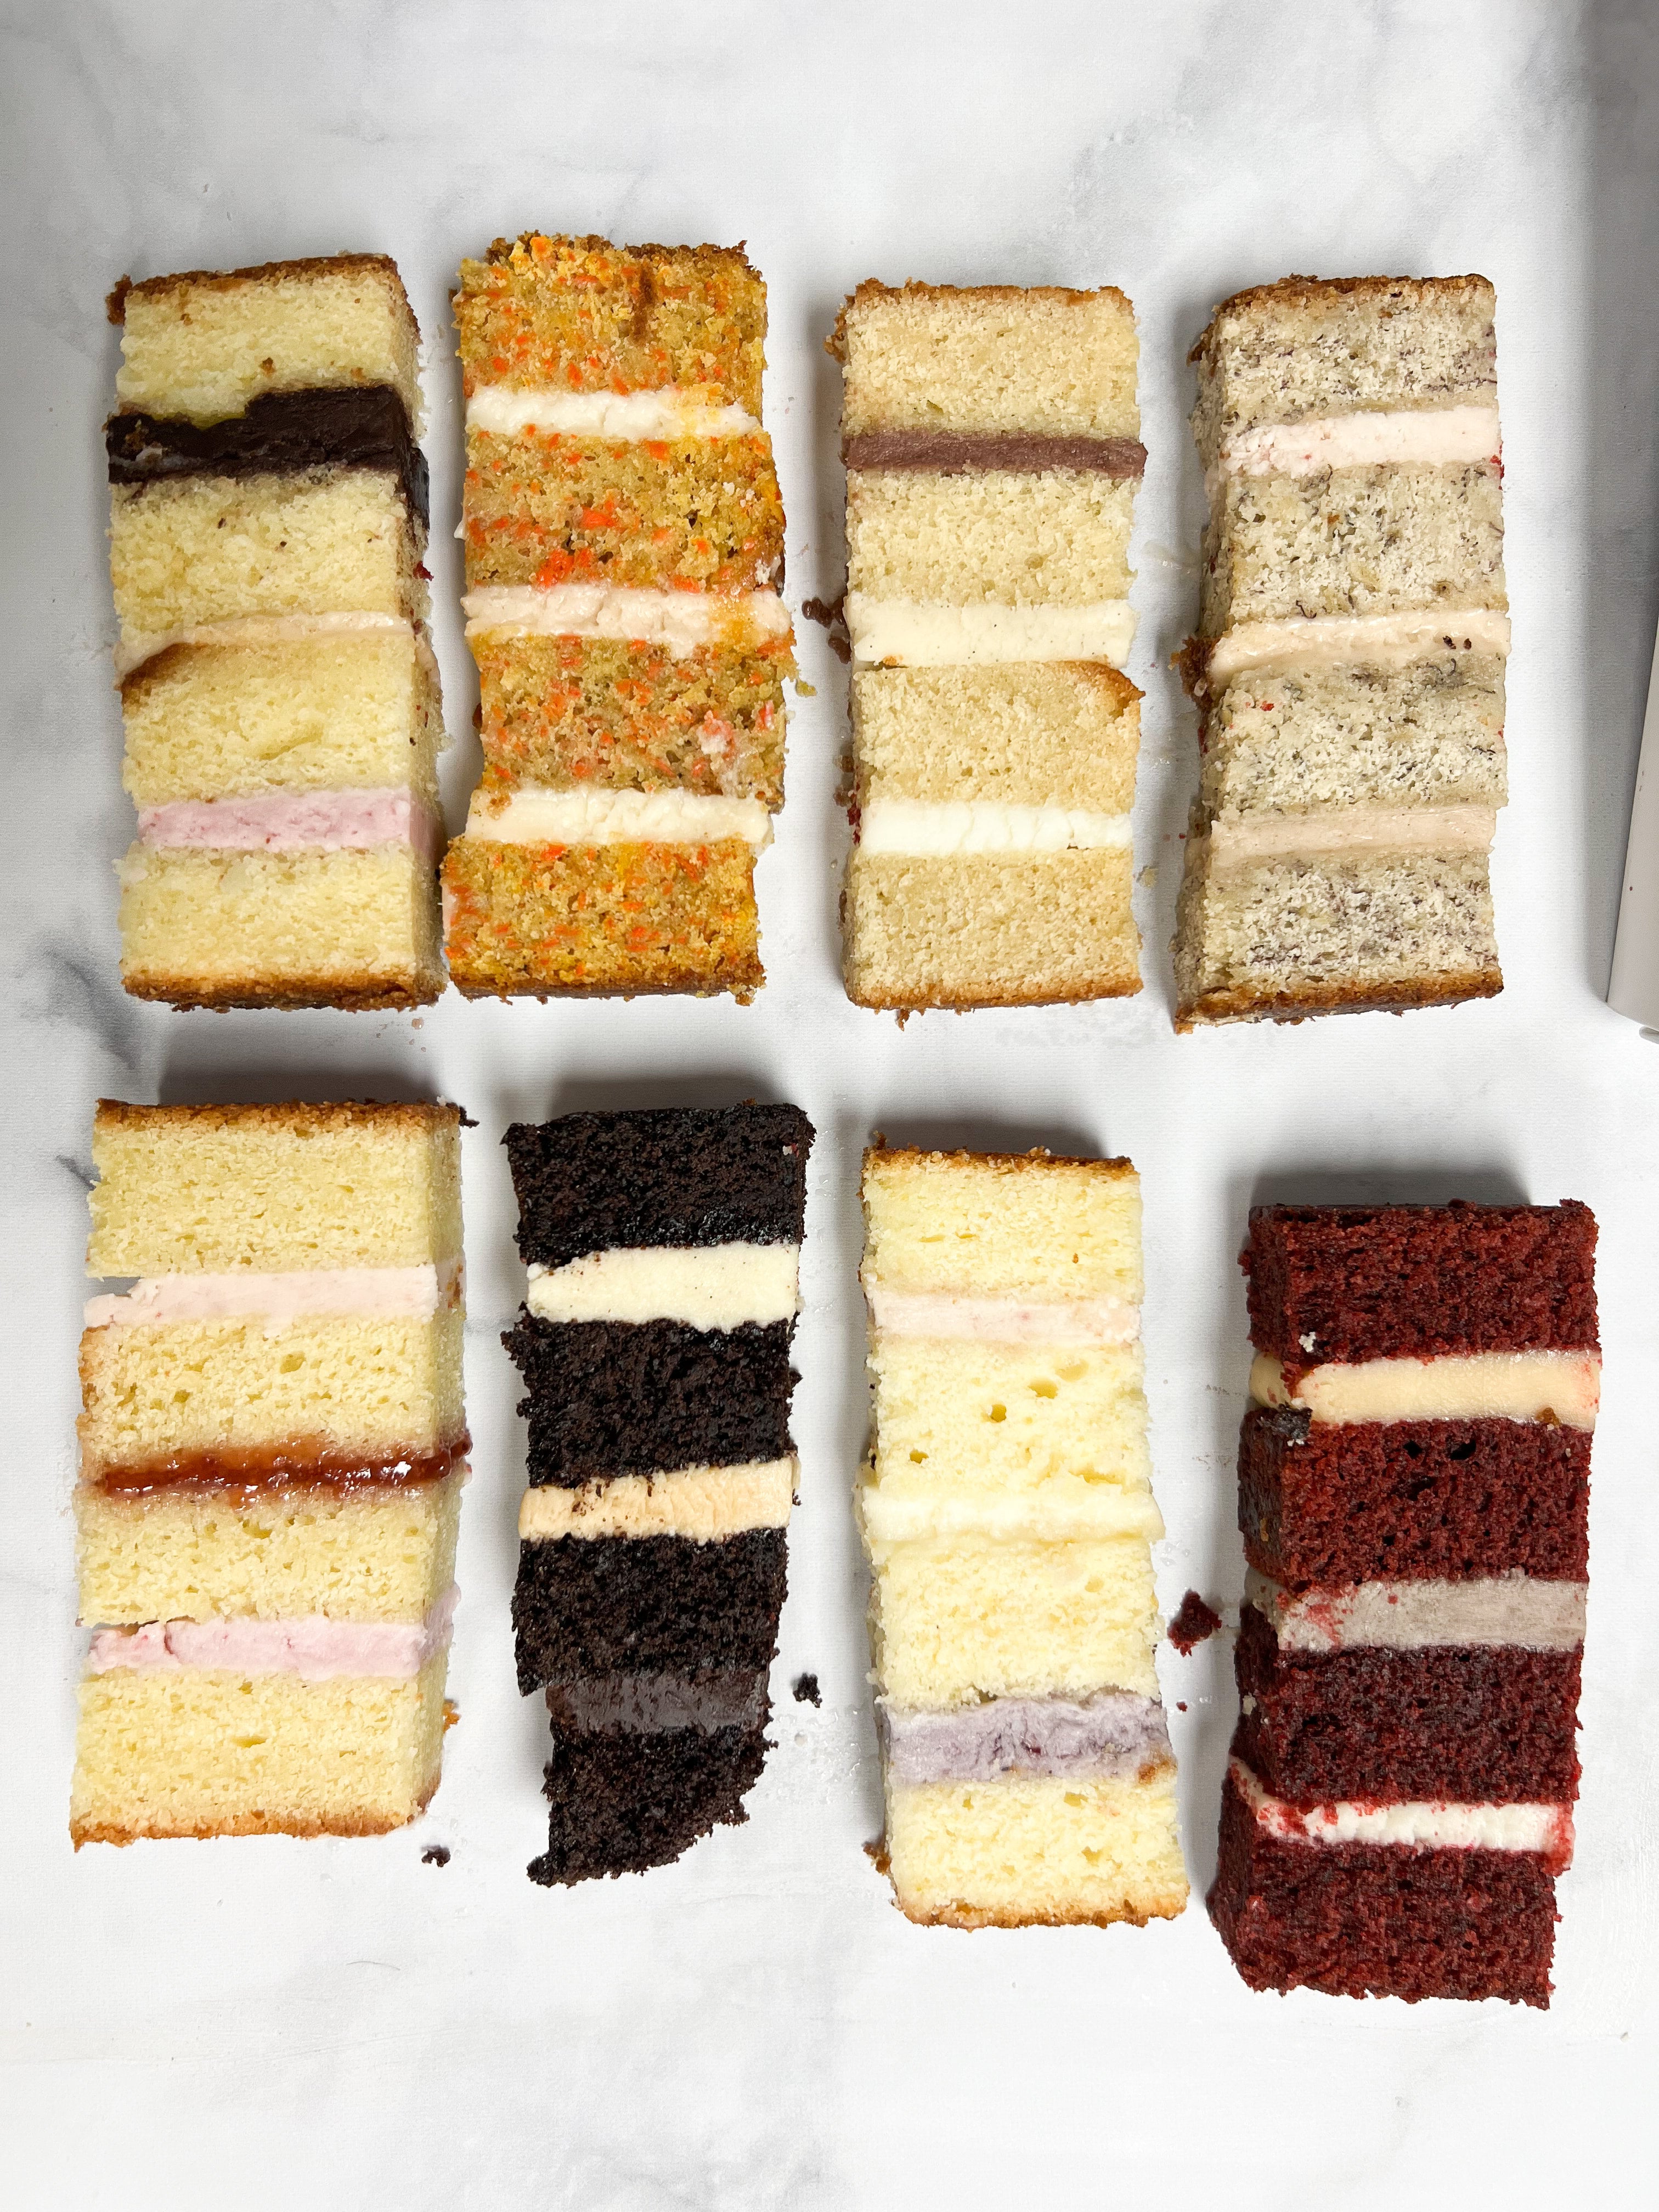 Popular Cake Flavours | Best Cake Flavour Combinations